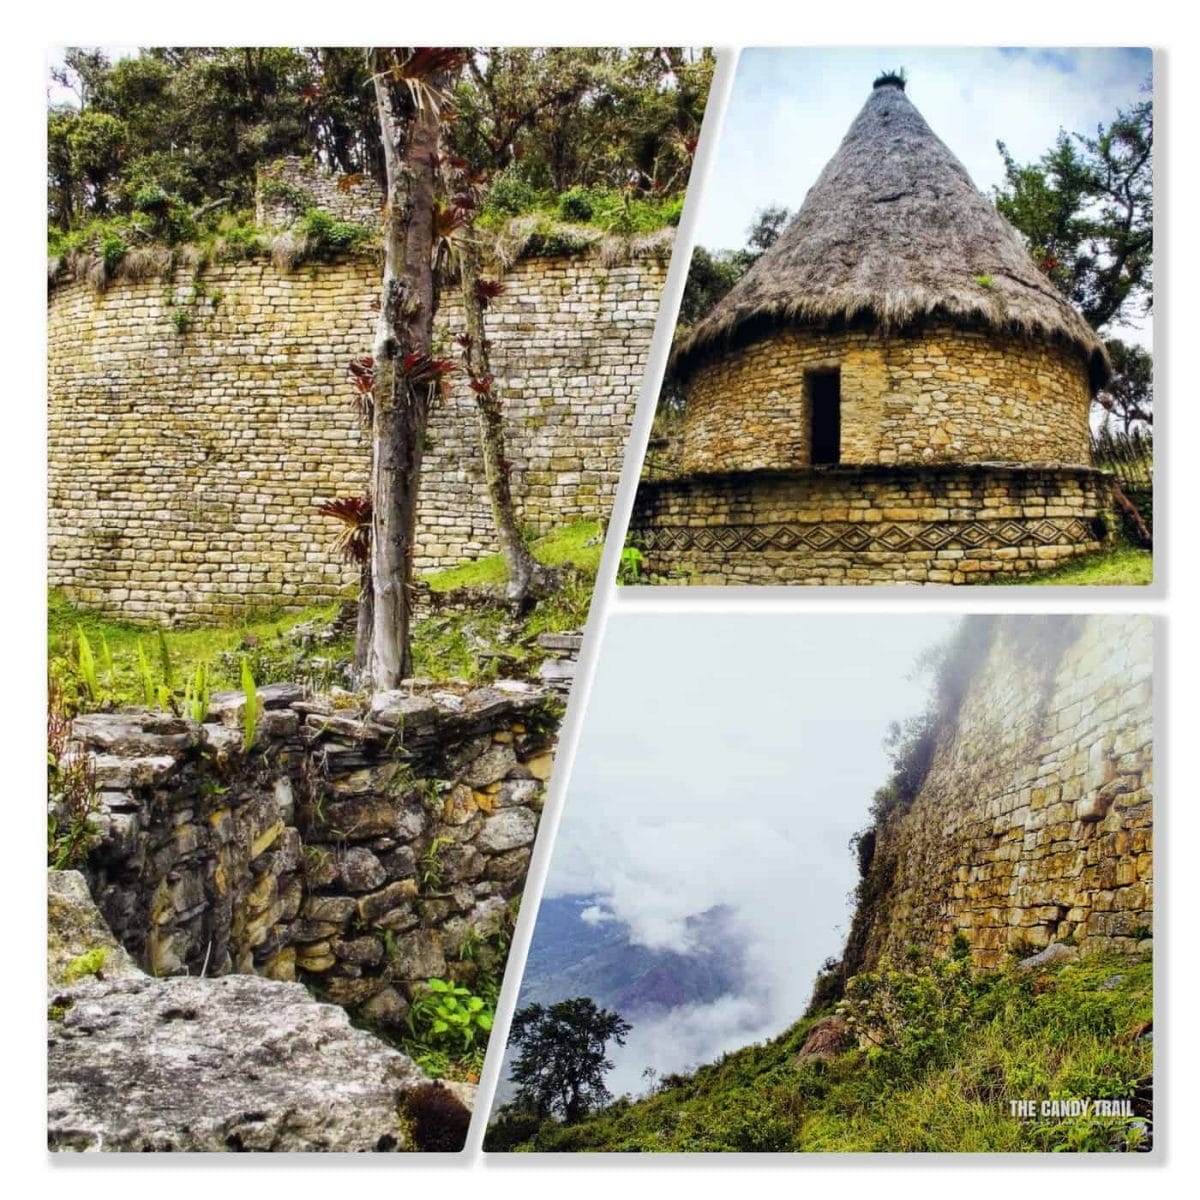 Chachapoyas architecture at the ruins of kuelap in peru